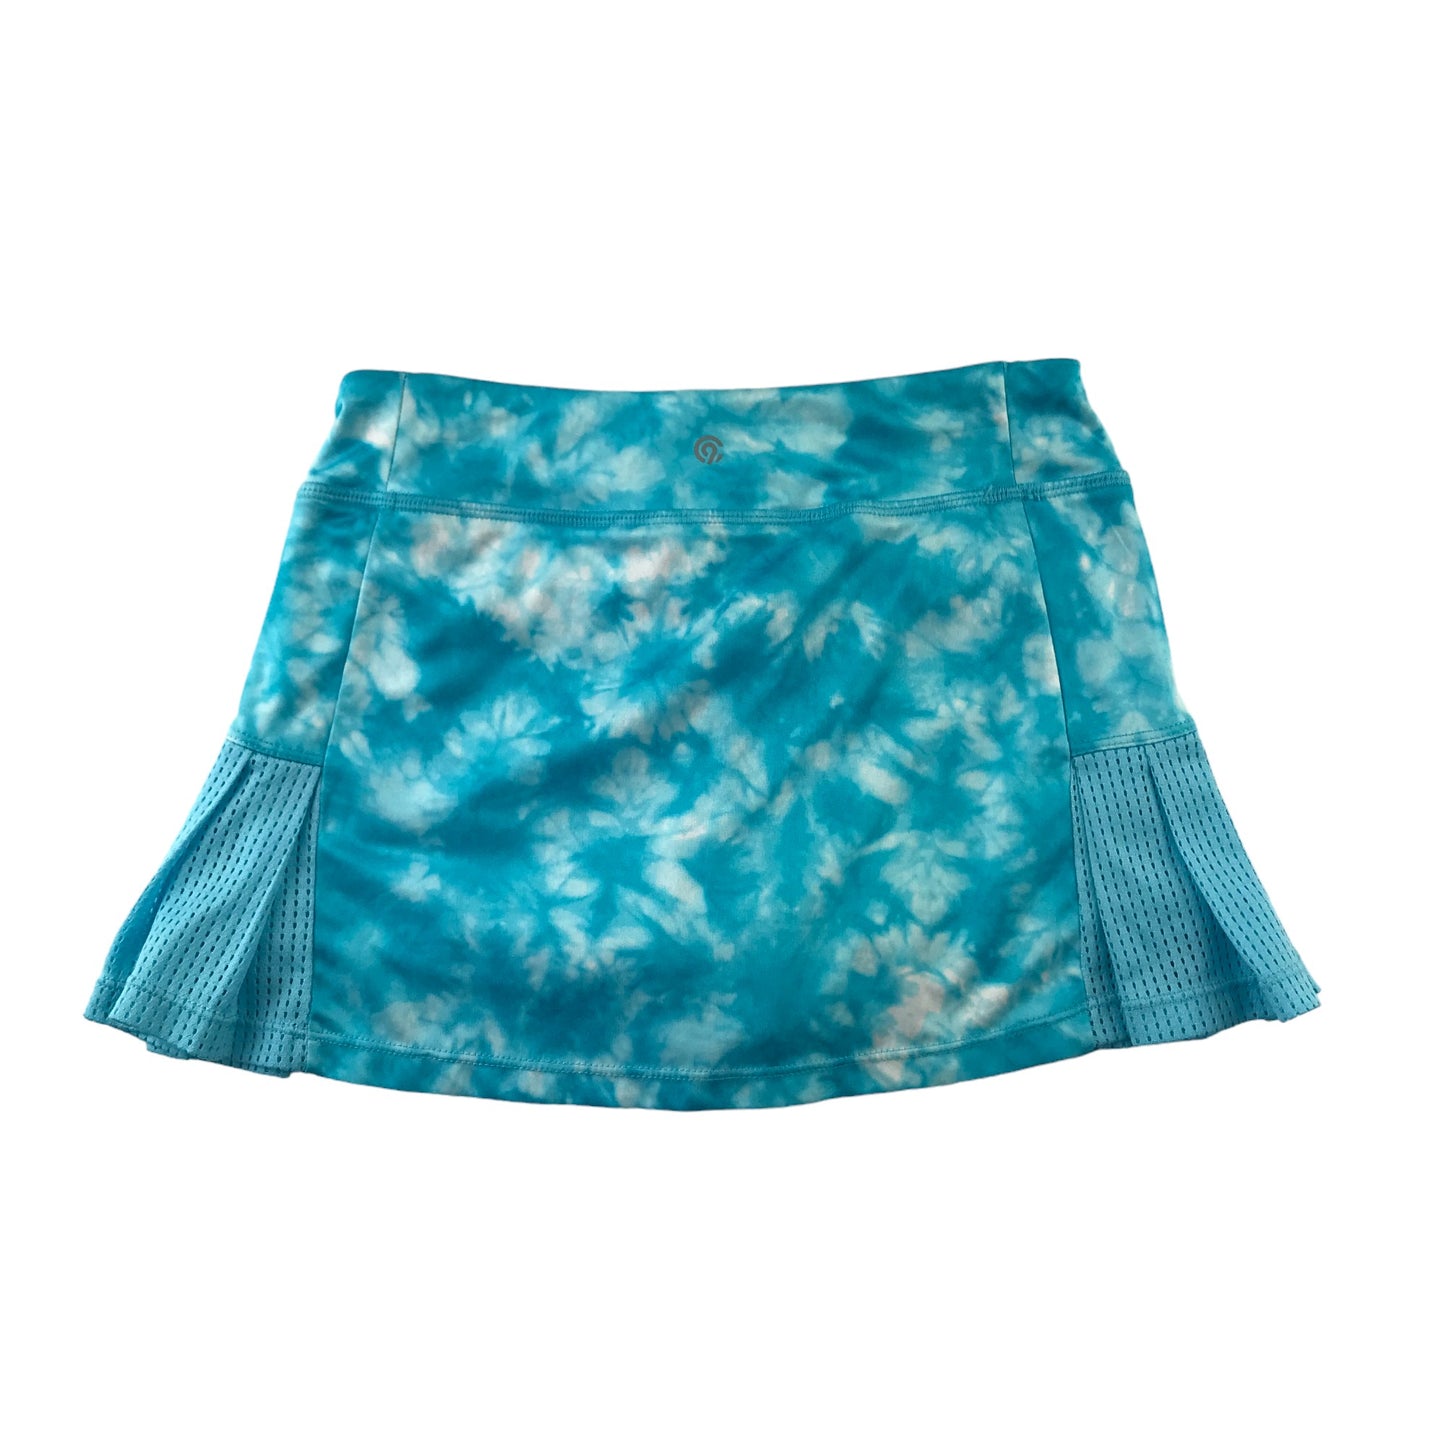 Champion Tennis Skirt Age 7 Blue Graphic Skirt with Under Shorts